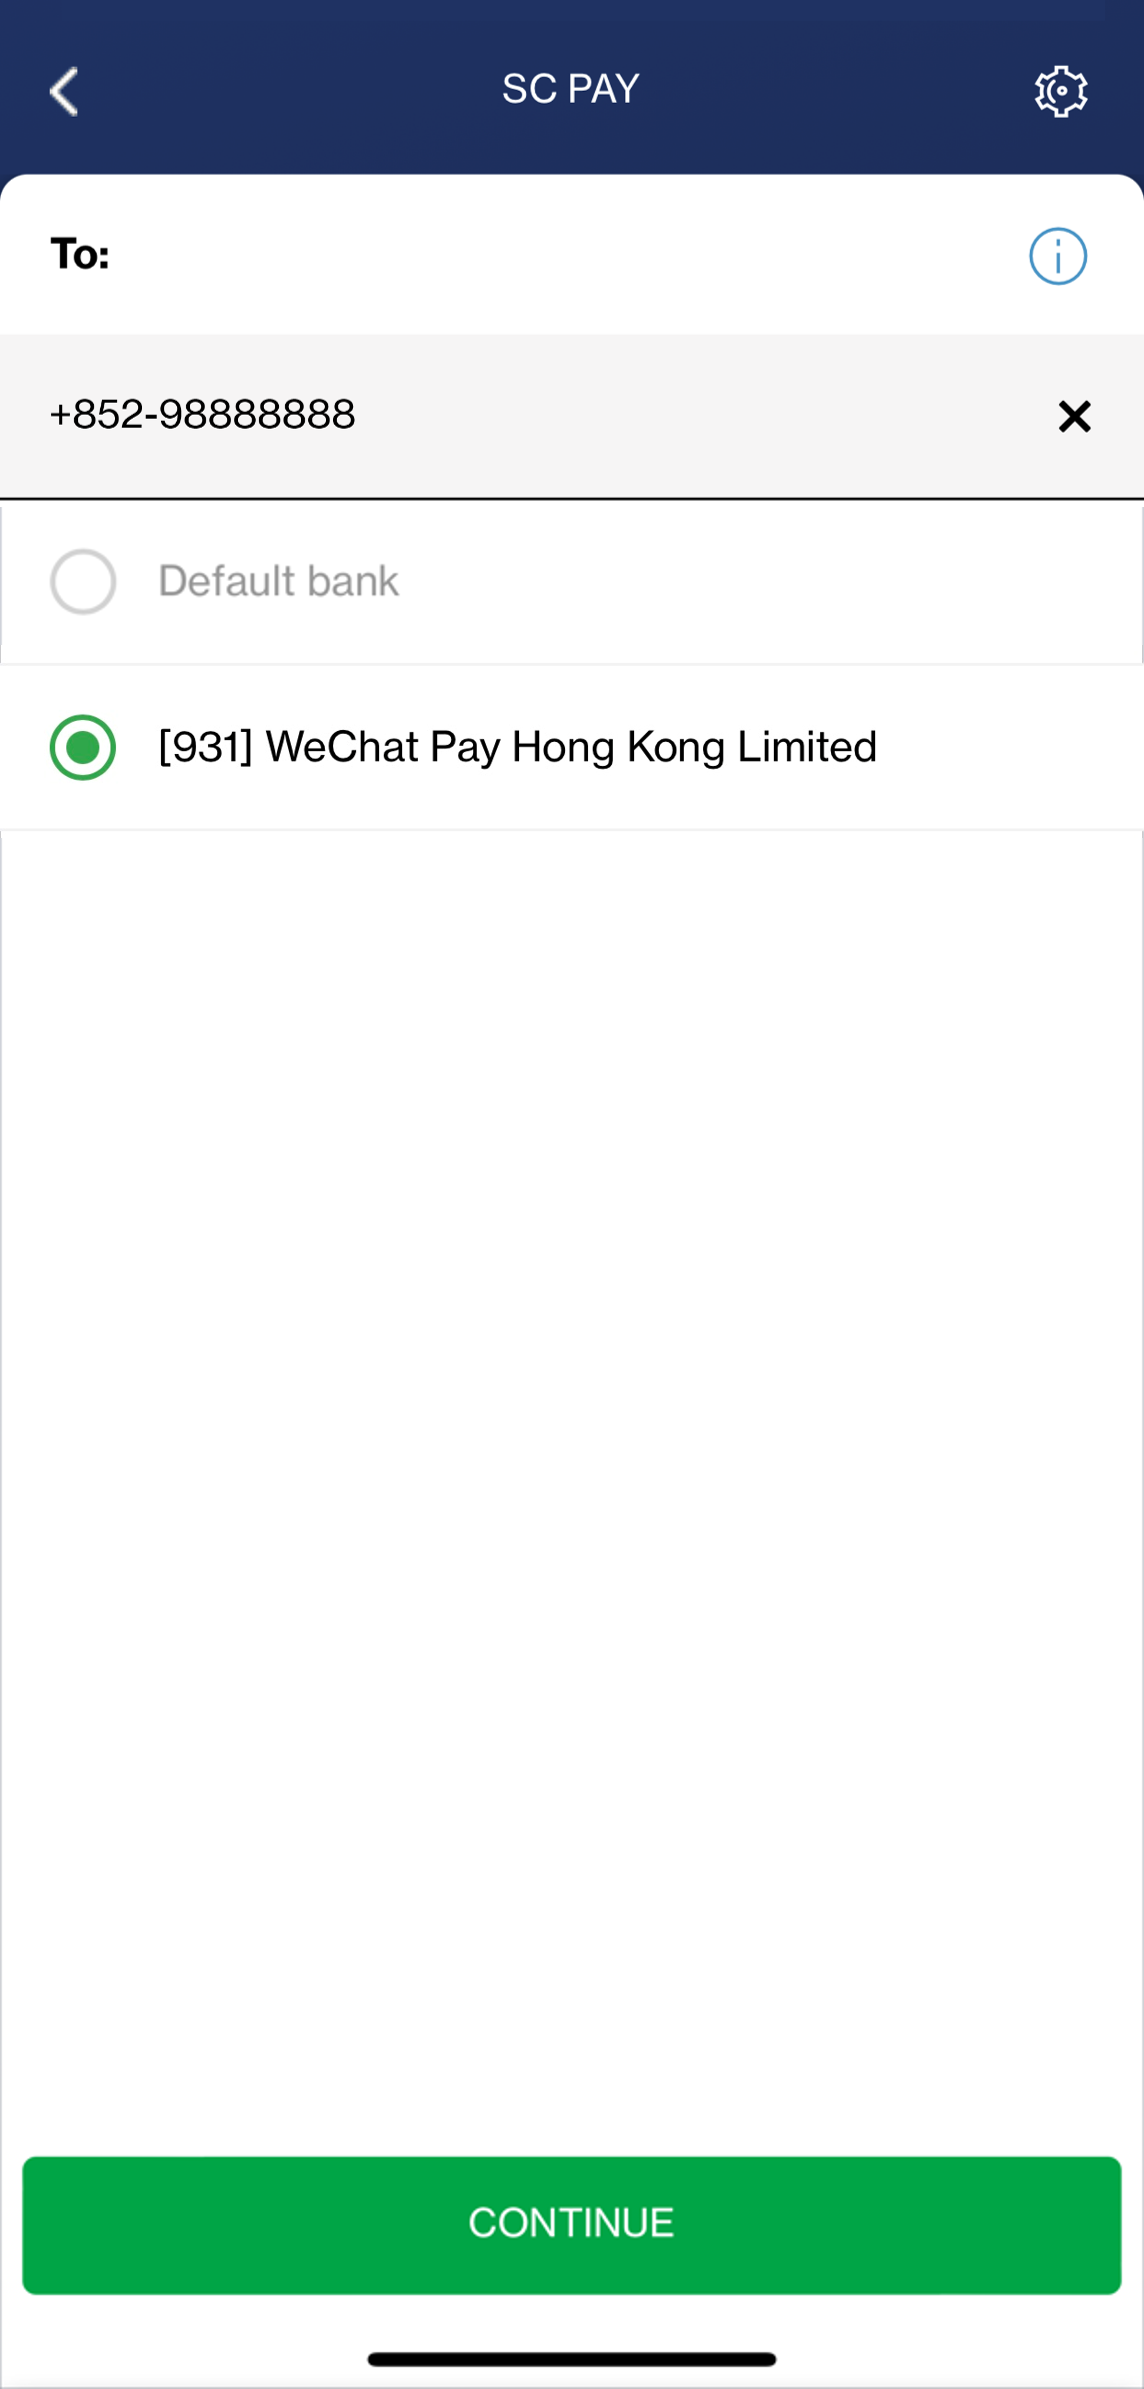 Input the FPS-registered Hong Kong mobile number with WeChat Pay HK as in Step 1. If WeChat Pay HK is the FPS default recipient, please choose “Default bank”. Otherwise, please select “Specific bank” then “[931] WeChat Pay Hong Kong Limited”.